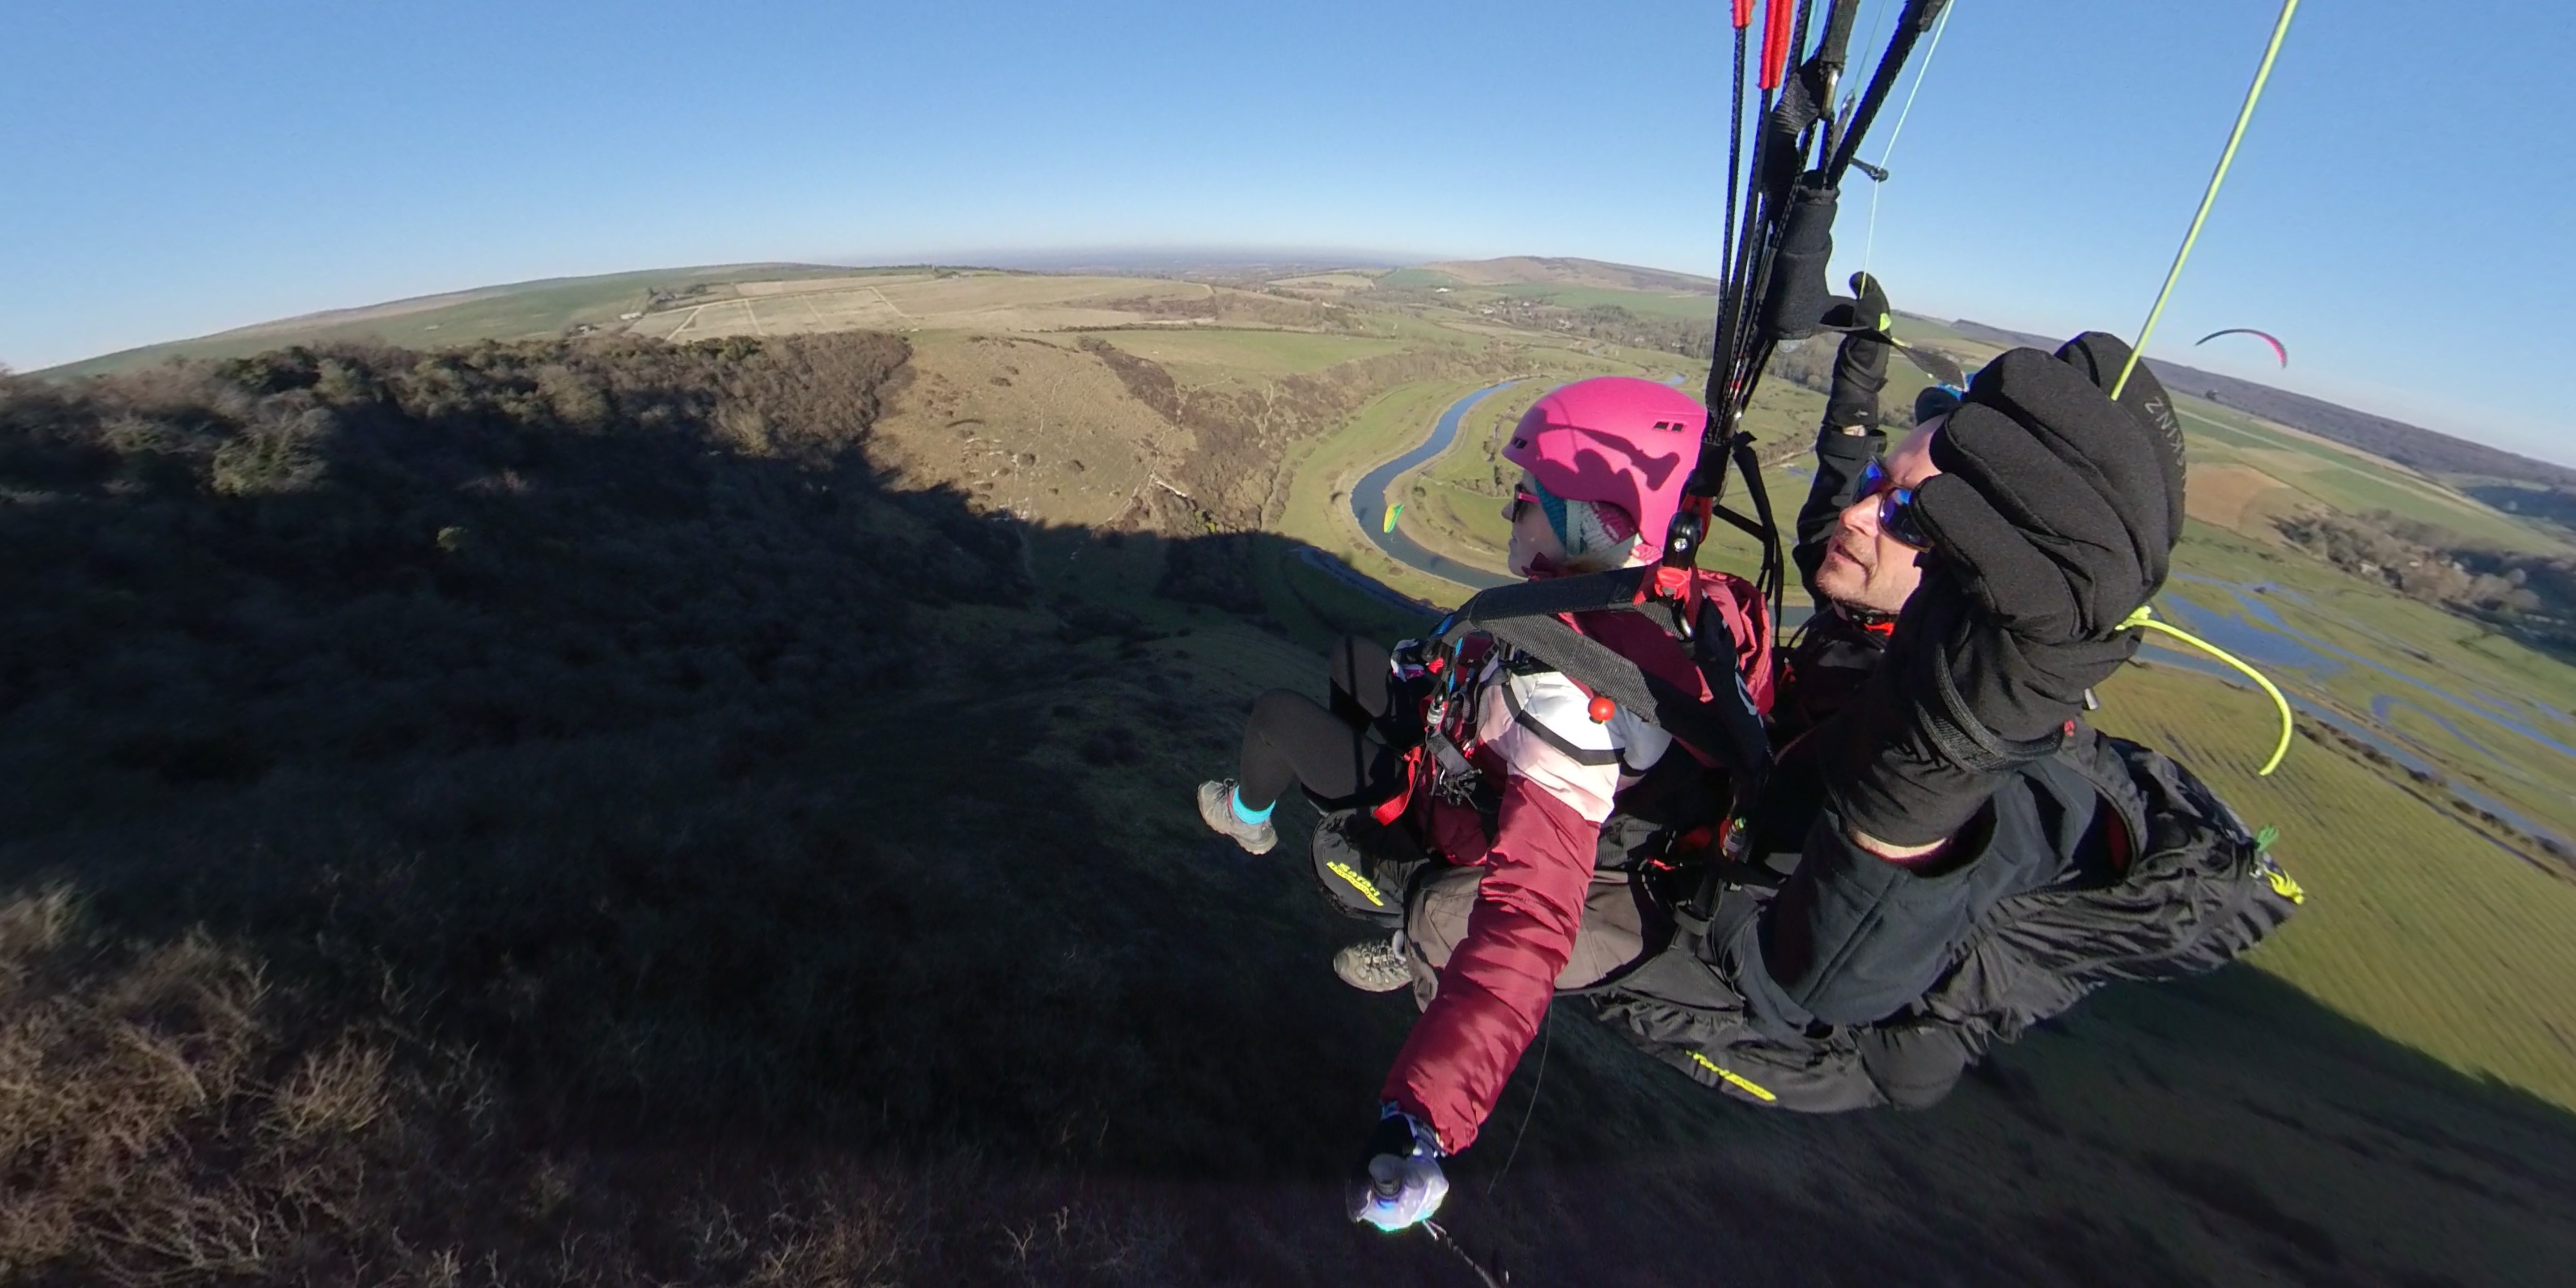 Tandem paragliding experience in Sussex from London with Mile High Paragliding